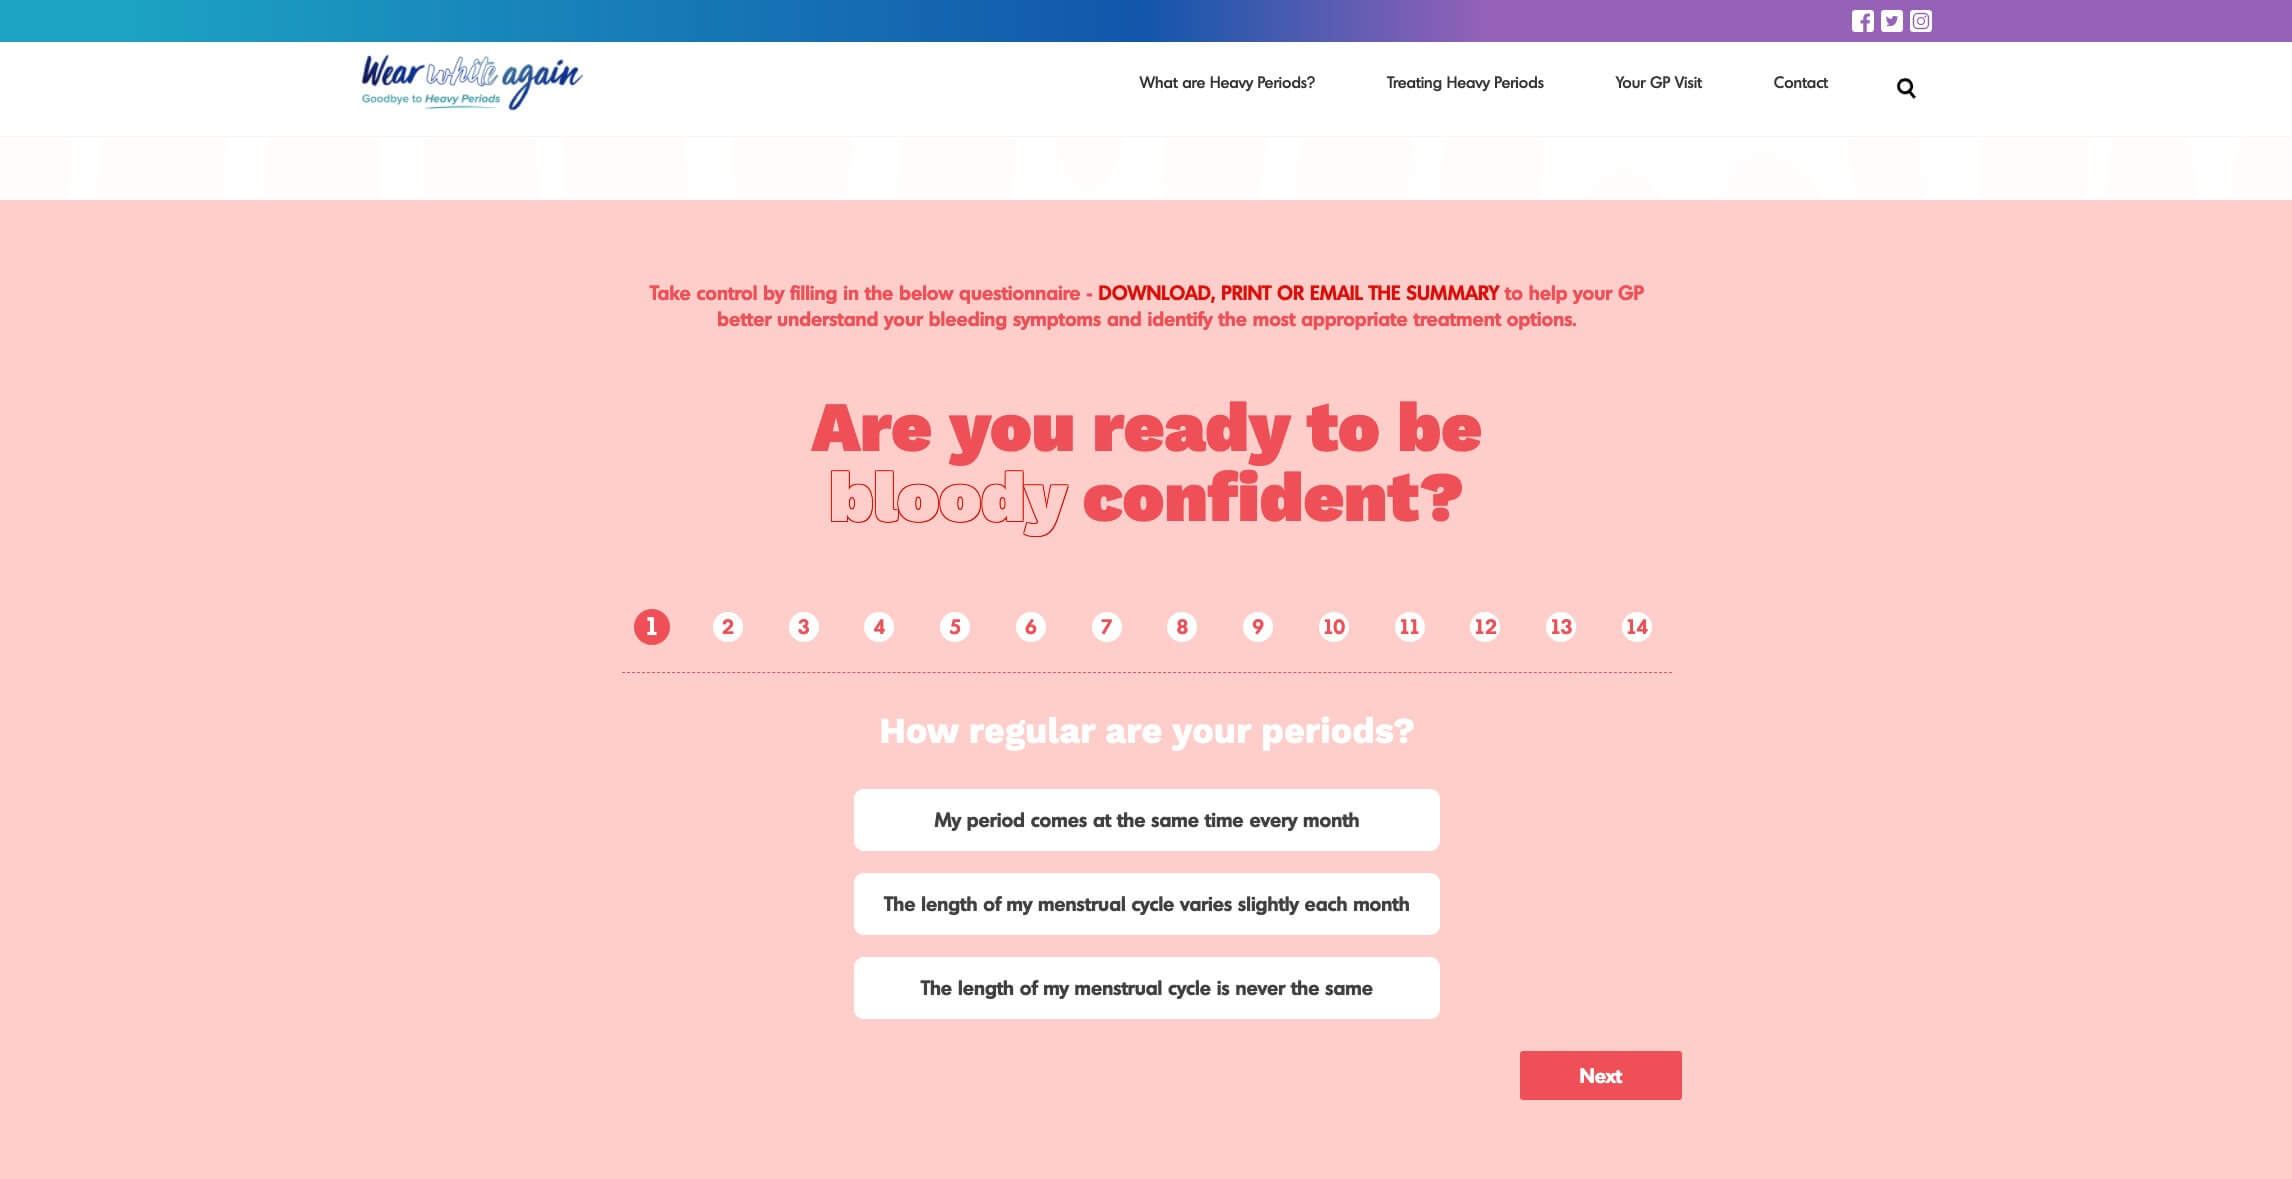 Questionnaire from Be Bloody Confident landing page.